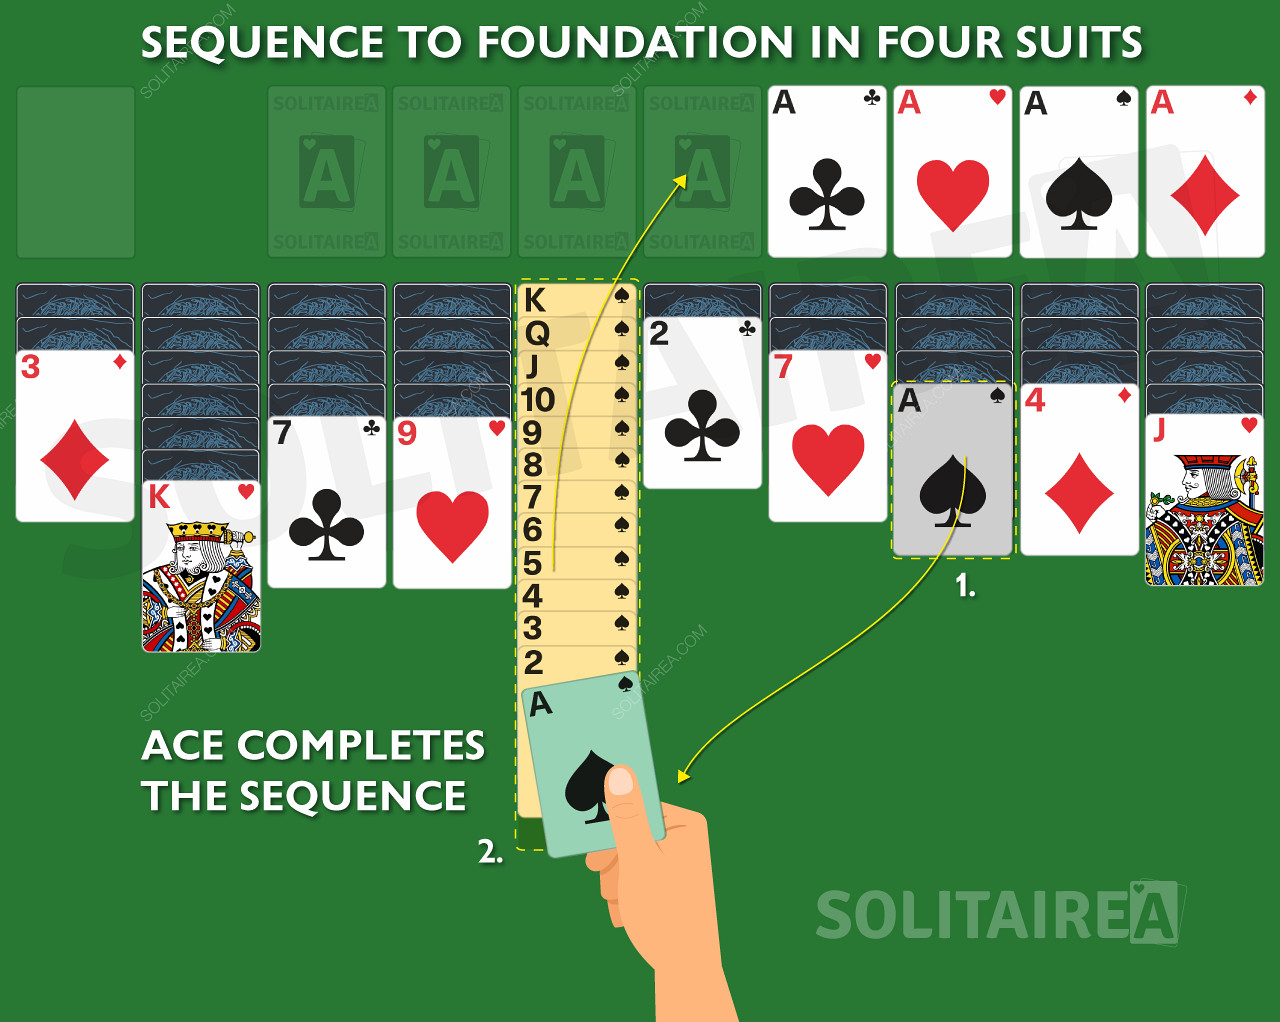 Spider Solitaire 4 Suits」ゲームでは、Aceがシークエンスを完成させる。